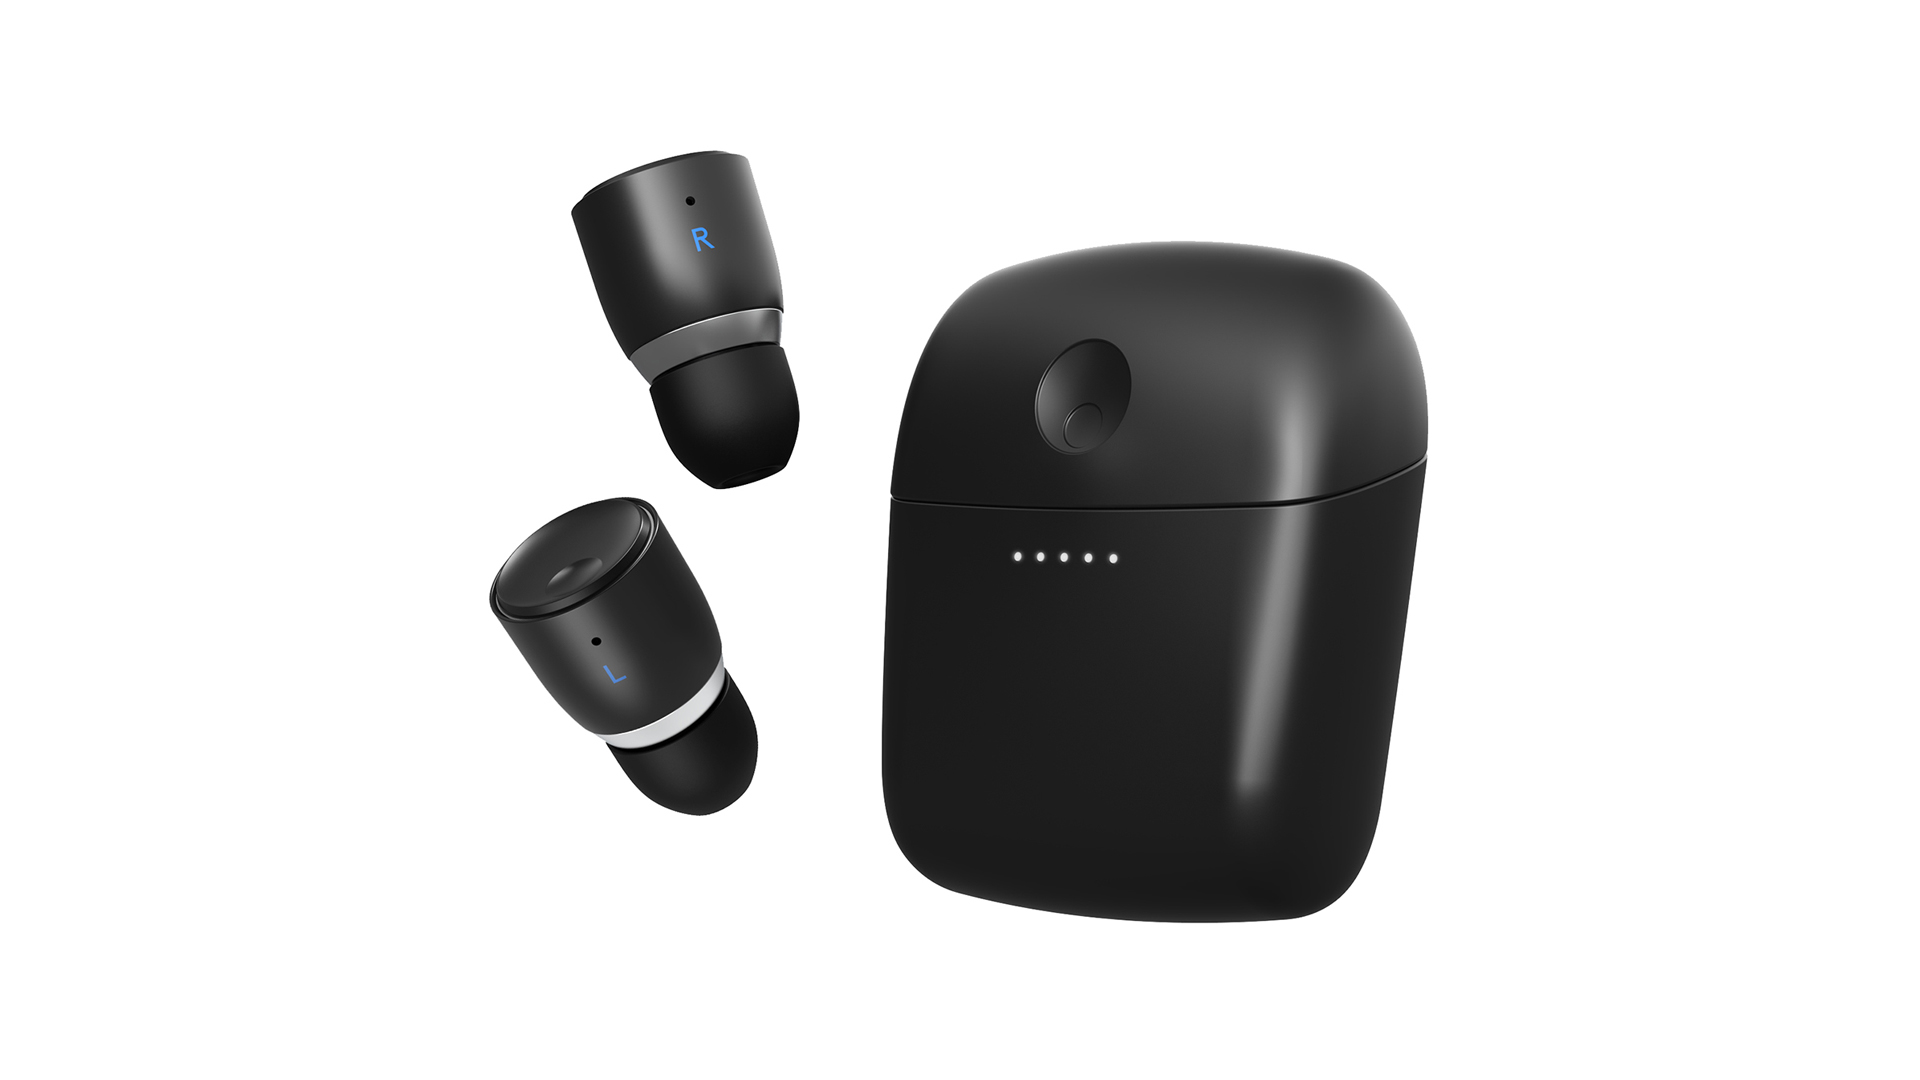 The cambridge audio melomania 1 plus wireless earbuds in black next to their charging case